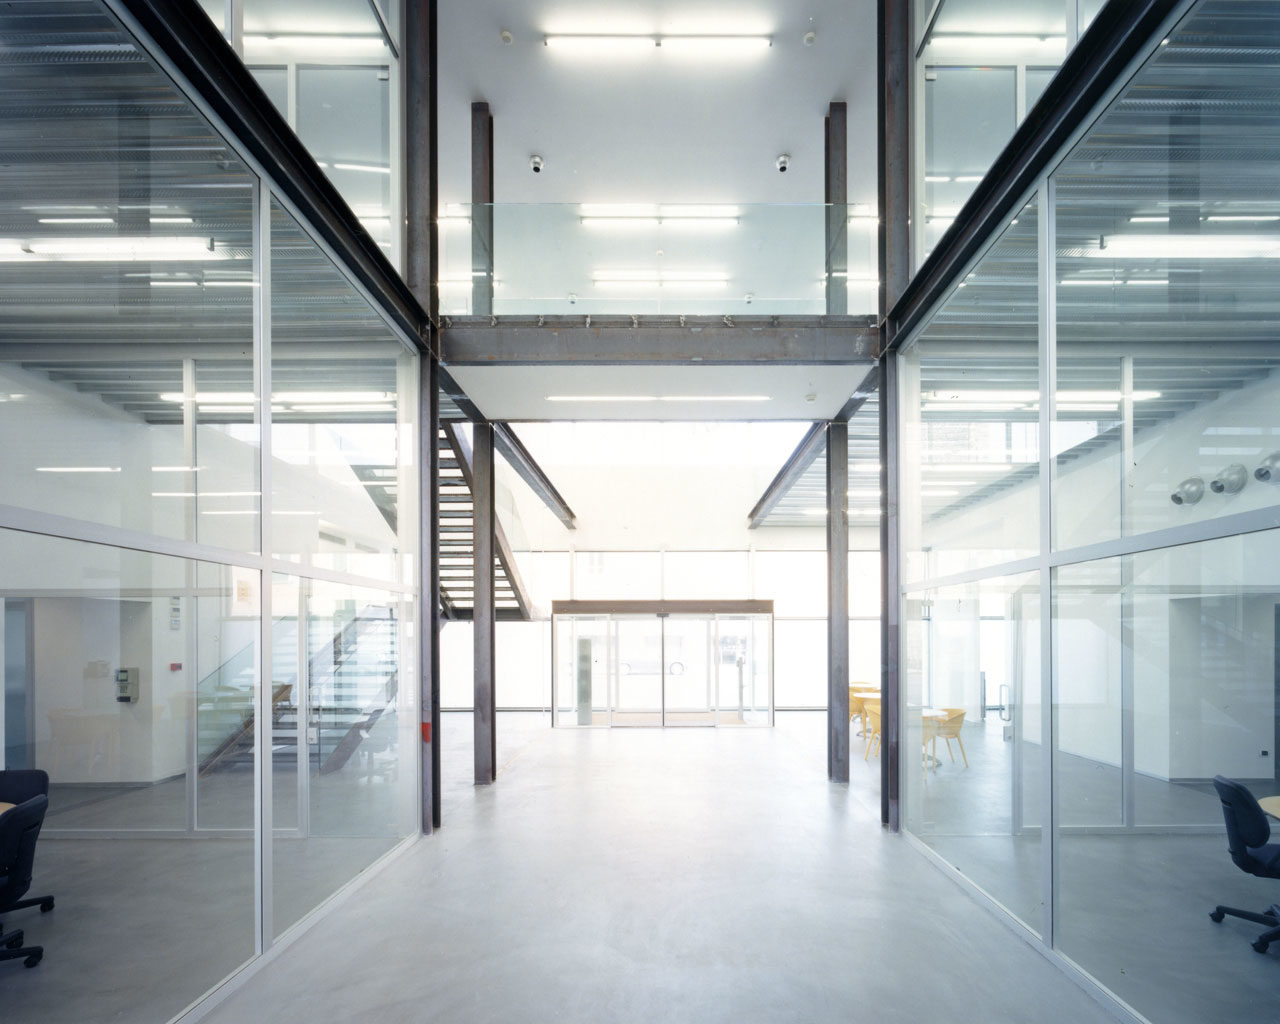 Offices in an existing building, Dalmine, Italy